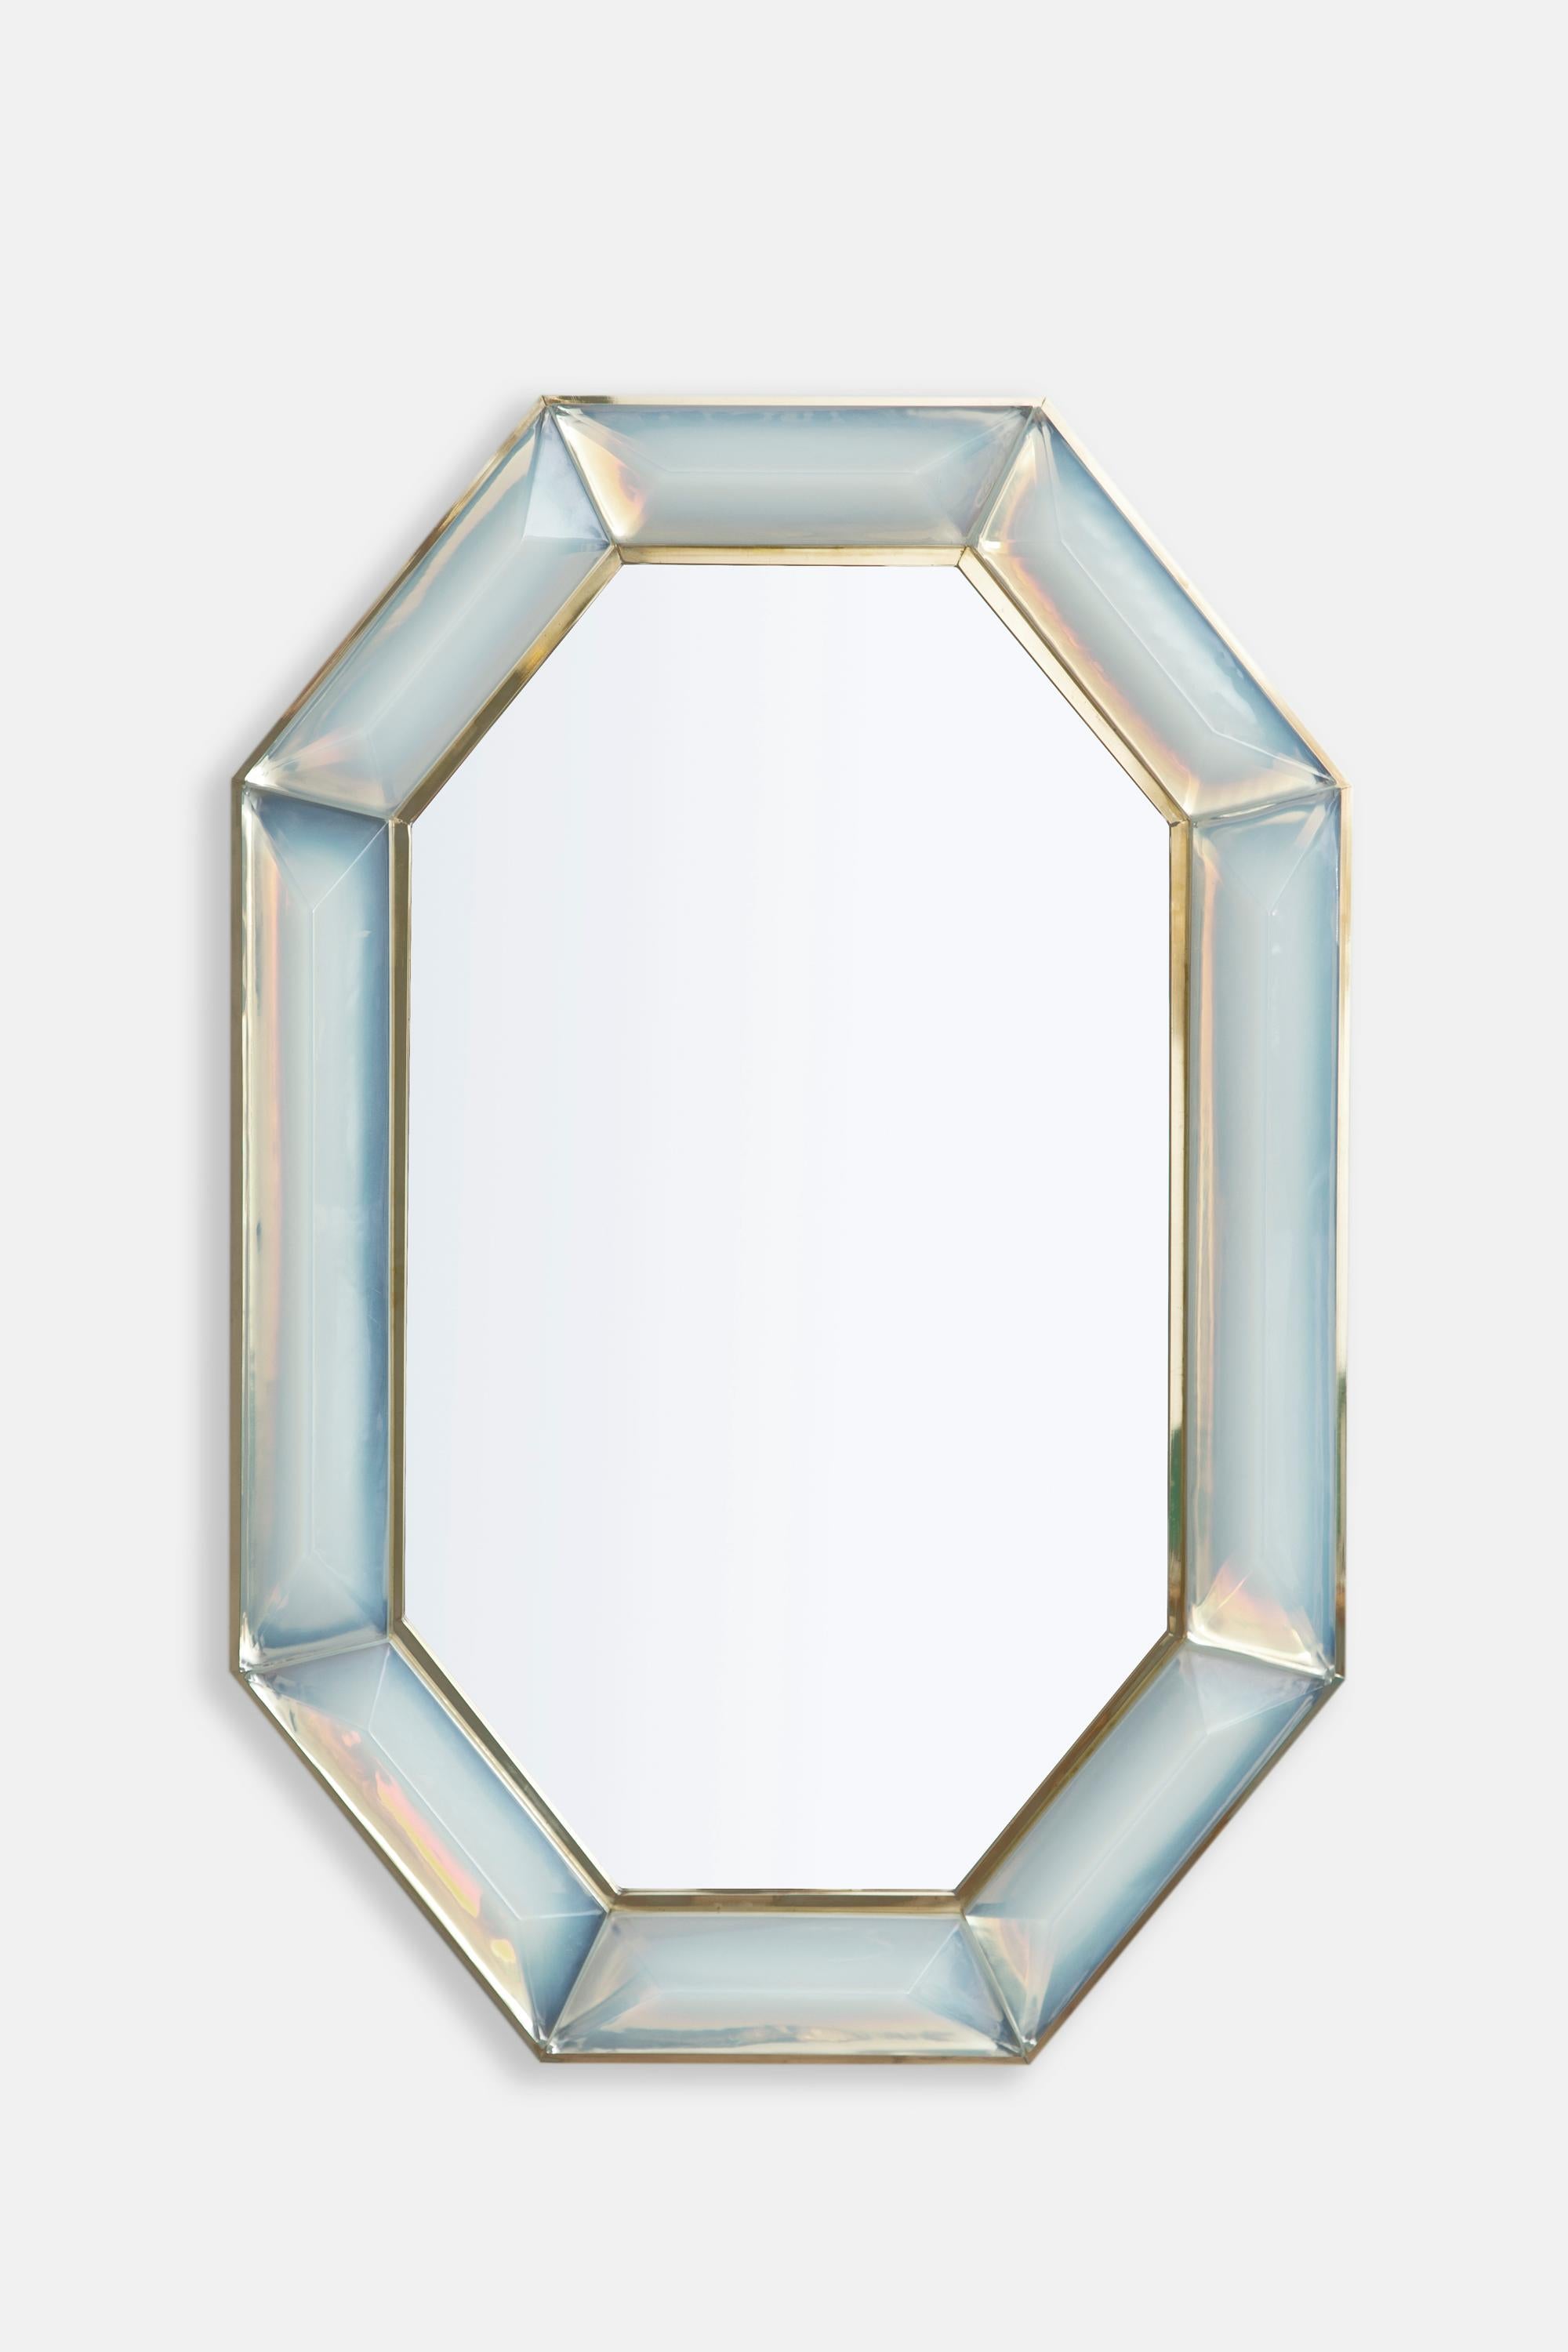 Pair of bespoke octagon iridescent opaline Murano glass mirror, in stock.
Vivid and intense iridescent opaline glass block with naturally occurring air inclusions throughout.
Highly polished faceted pattern.
Brass gallery all around.
Each mirror is